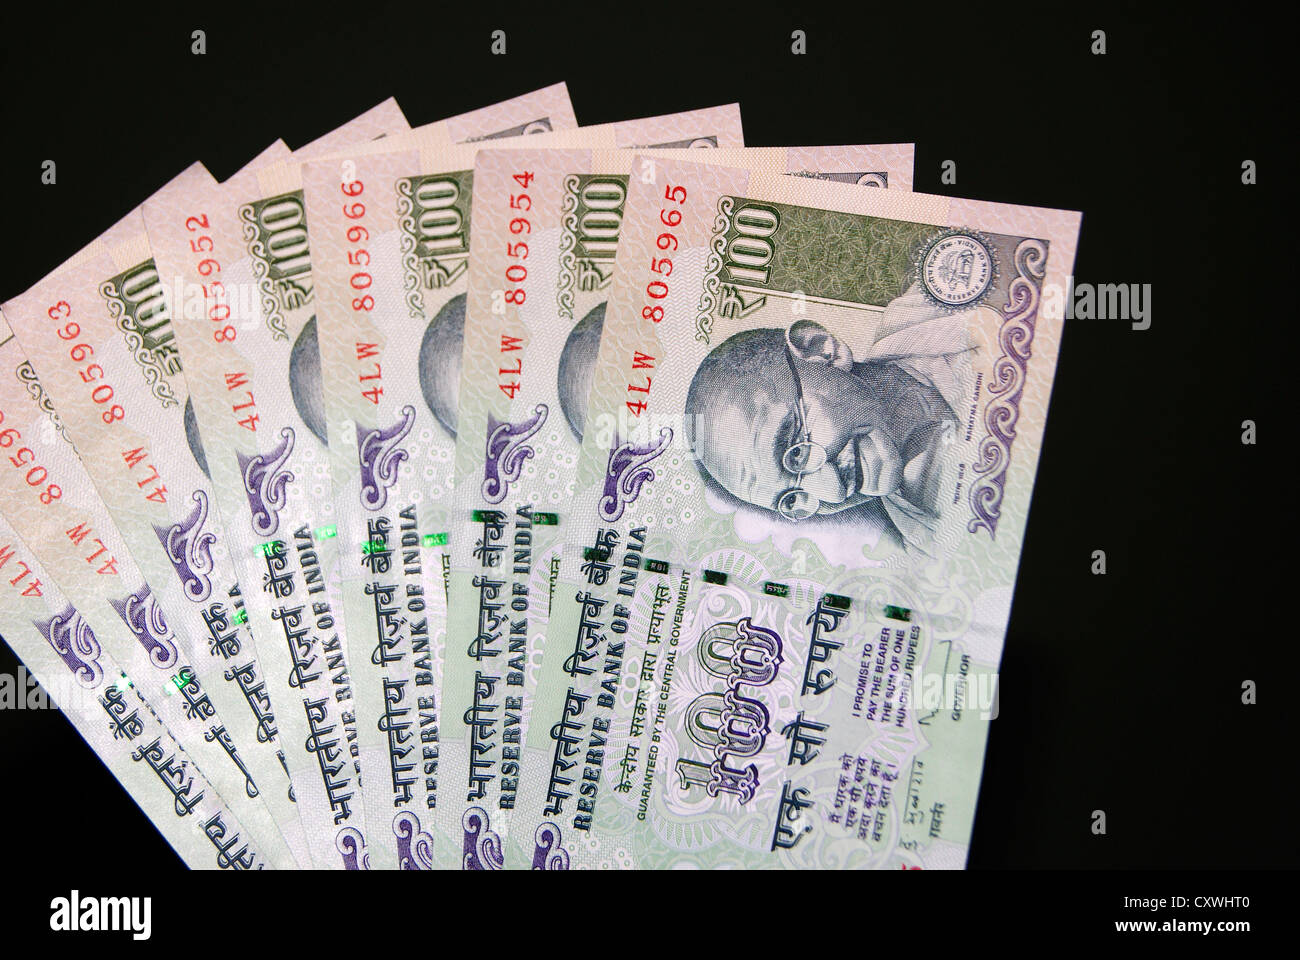 Indian Currency 100 Hundred Rupees Reserve Bank of India Bank Money Notes closeup Cutout View Stock Photo